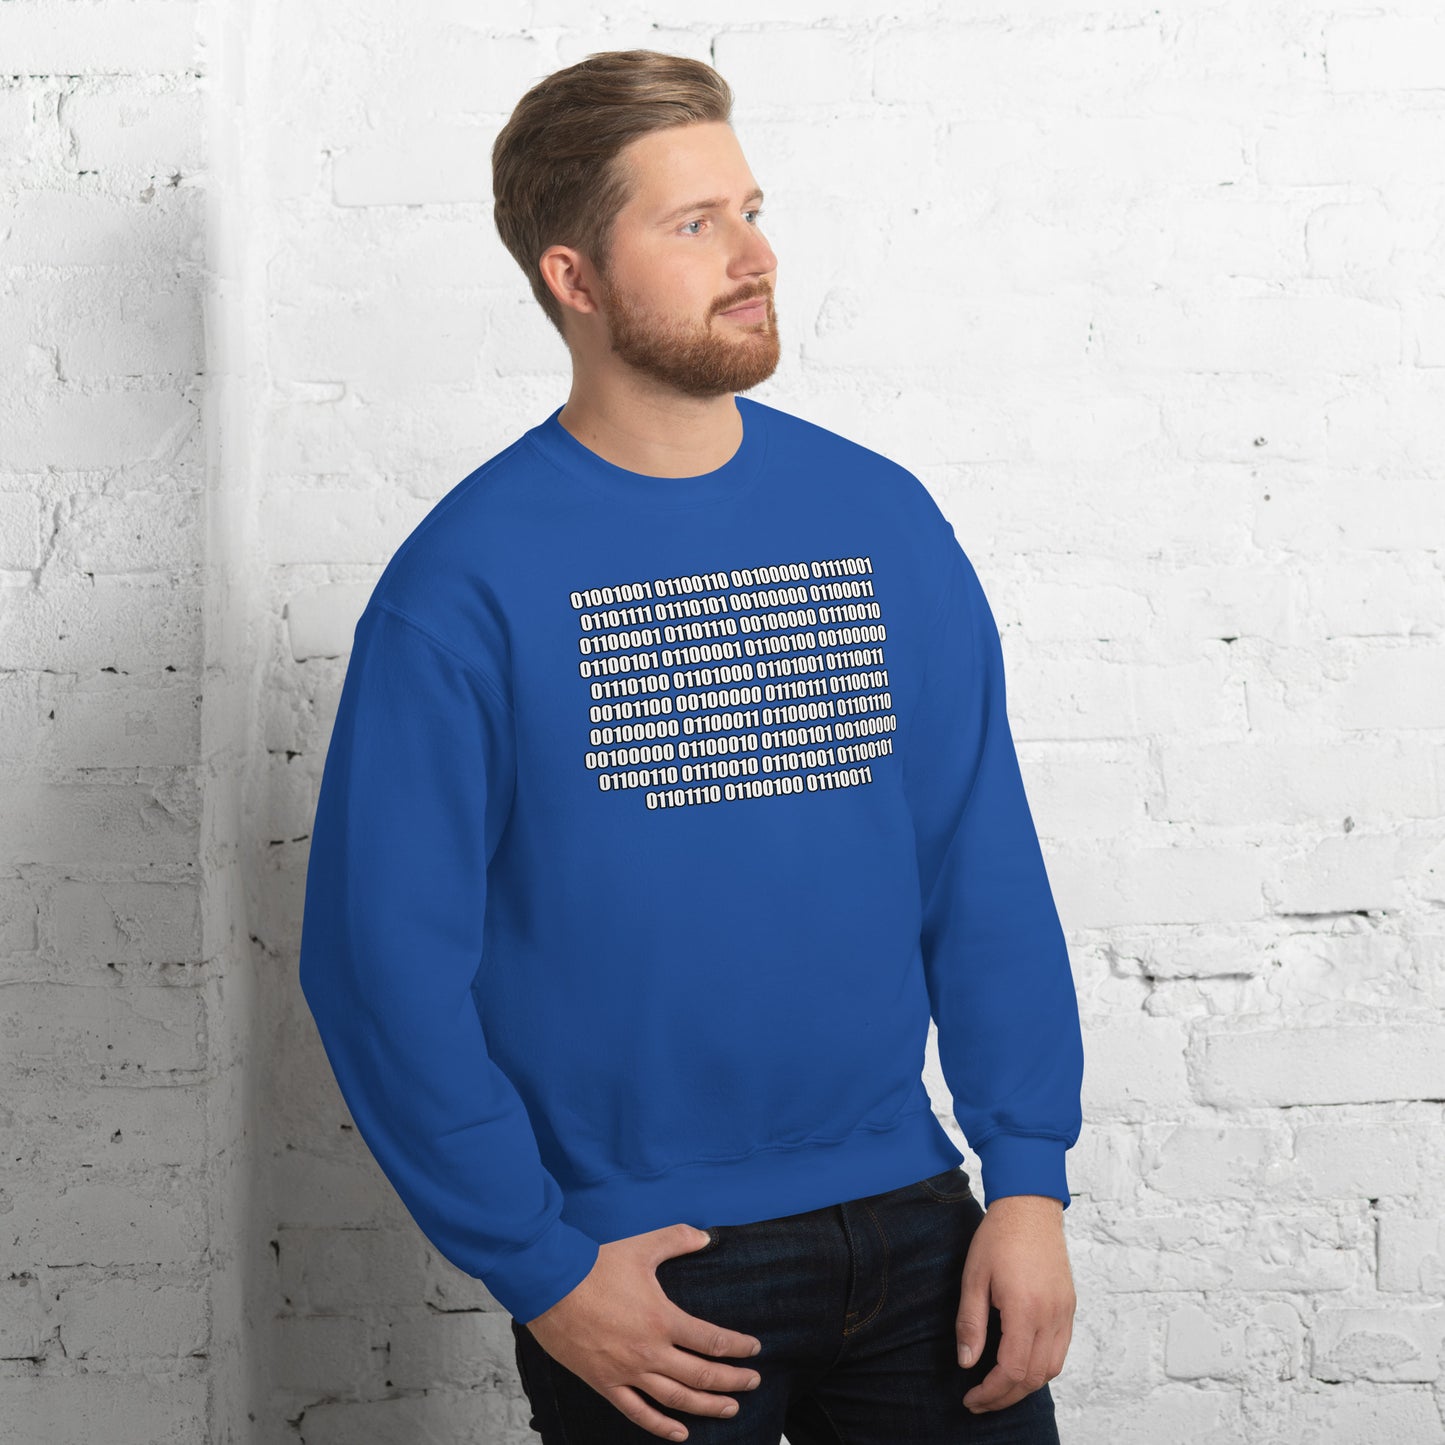 Men with royal blue sweatshirt with binaire text "If you can read this"